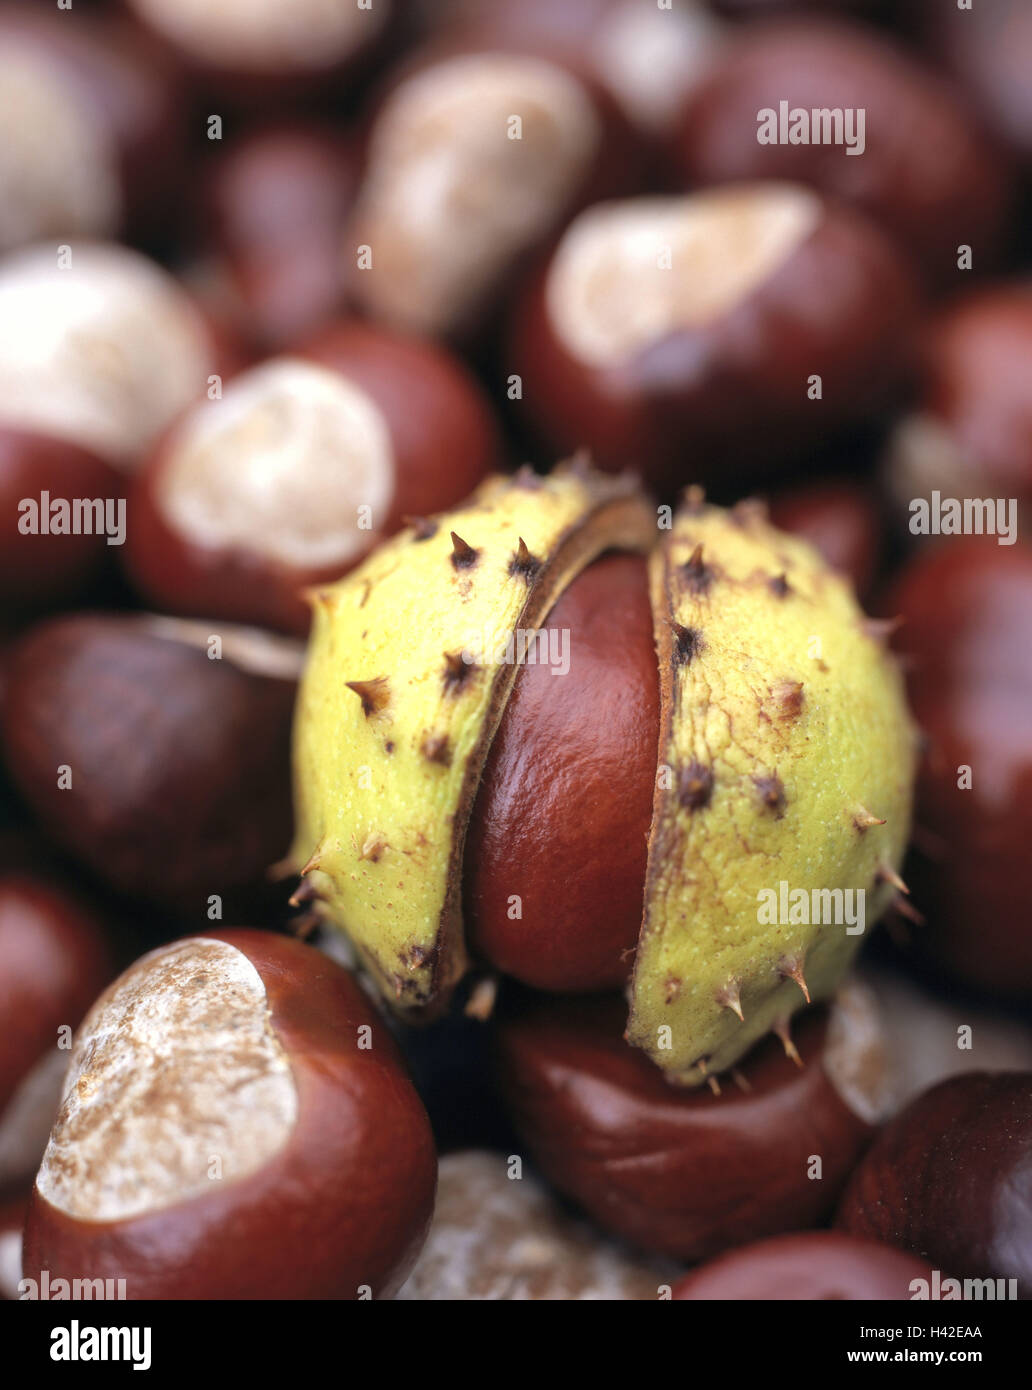 Chestnuts, red horse chestnut, Aesculus x carnea, autumn, meat Red horse chestnuts, Pavie, Aesculus rubicunda, horse chestnuts, chestnut, capsules, scarfs, spiny, opened, capsule fruits, semens, nature, season, harvest, collect, close up Stock Photo